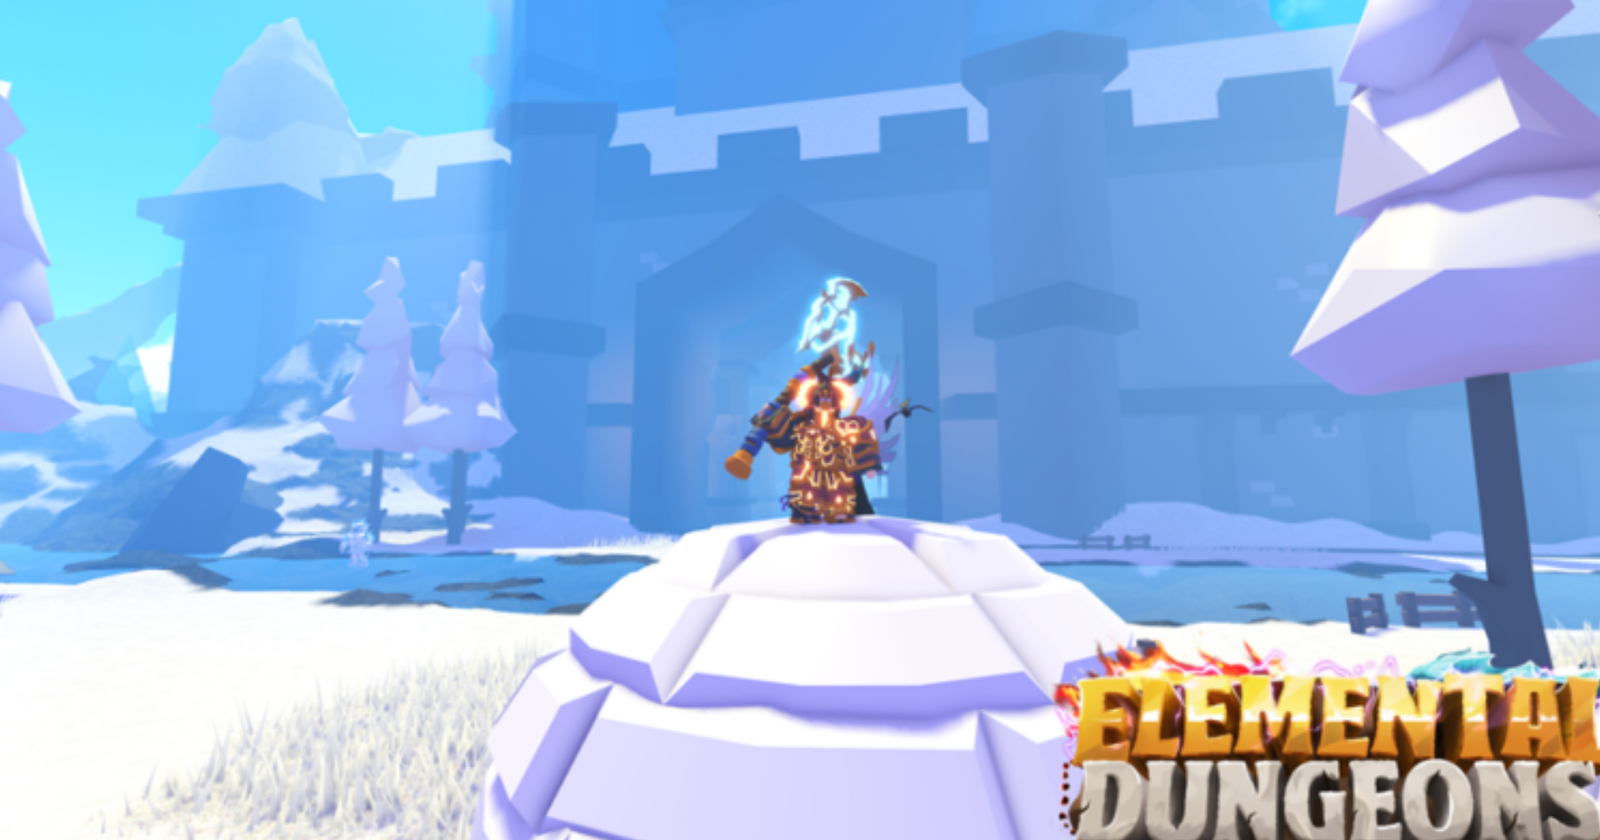 Game name: elemental dungeons available on all platforms #roblox